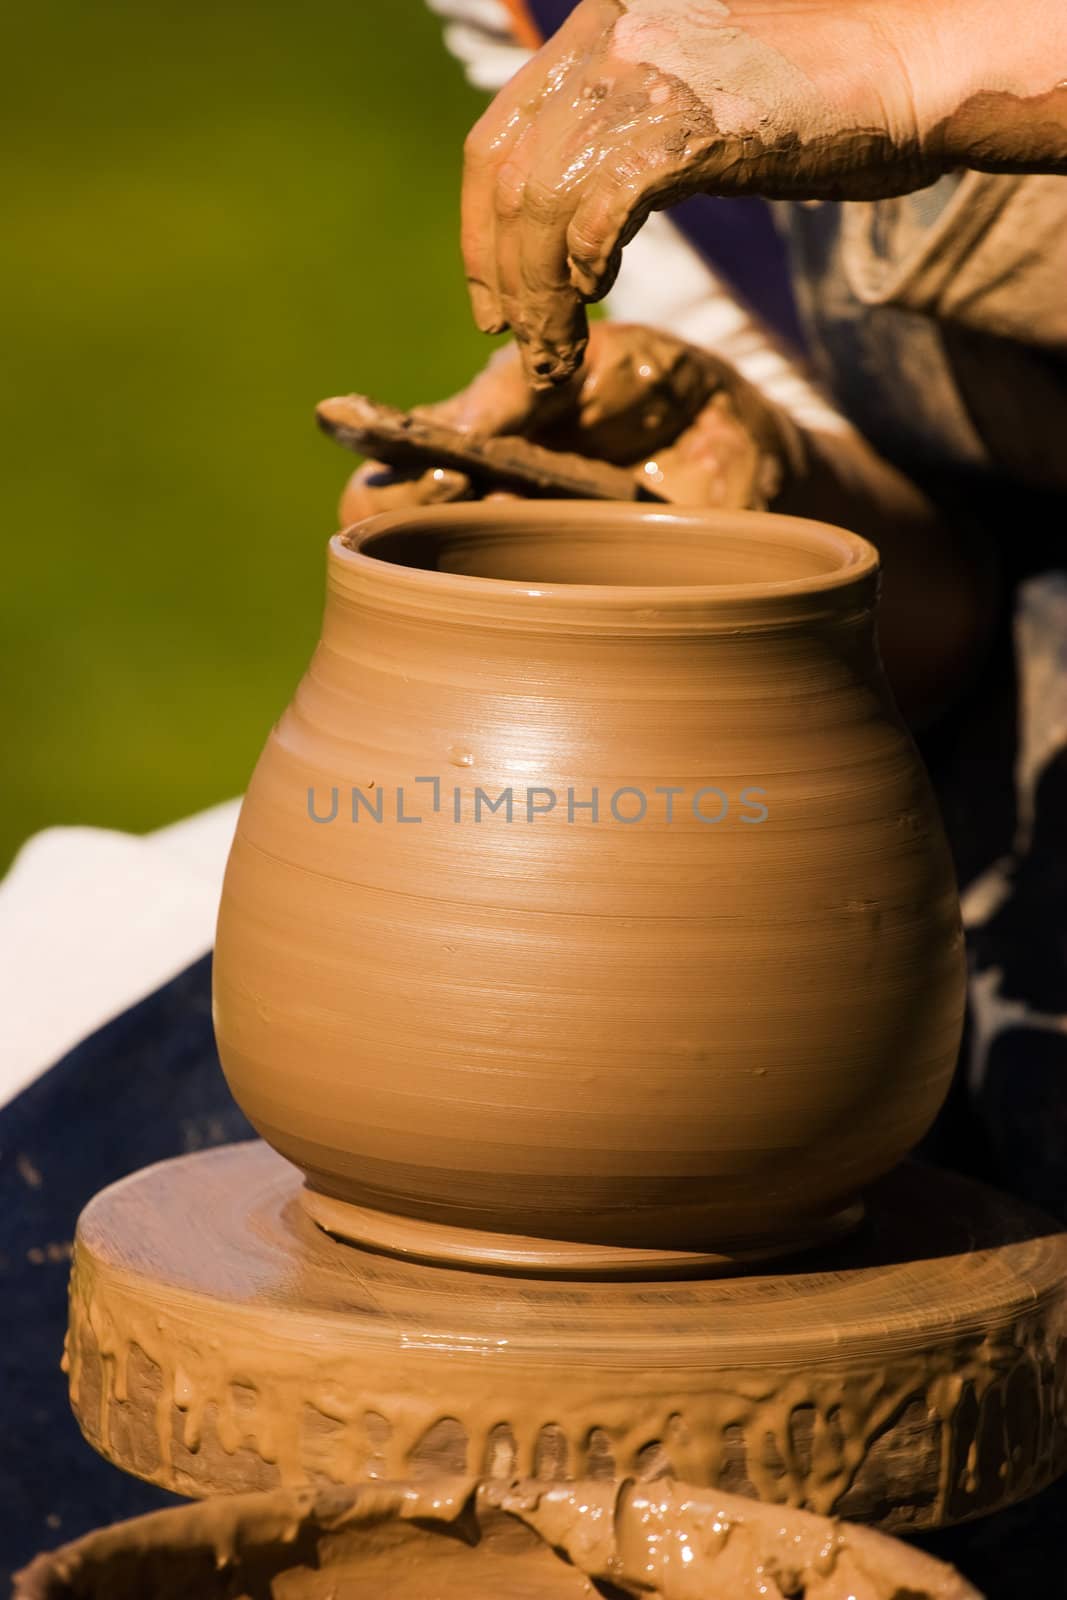 Potters hands creating a traditional clay vase on the turning wheel